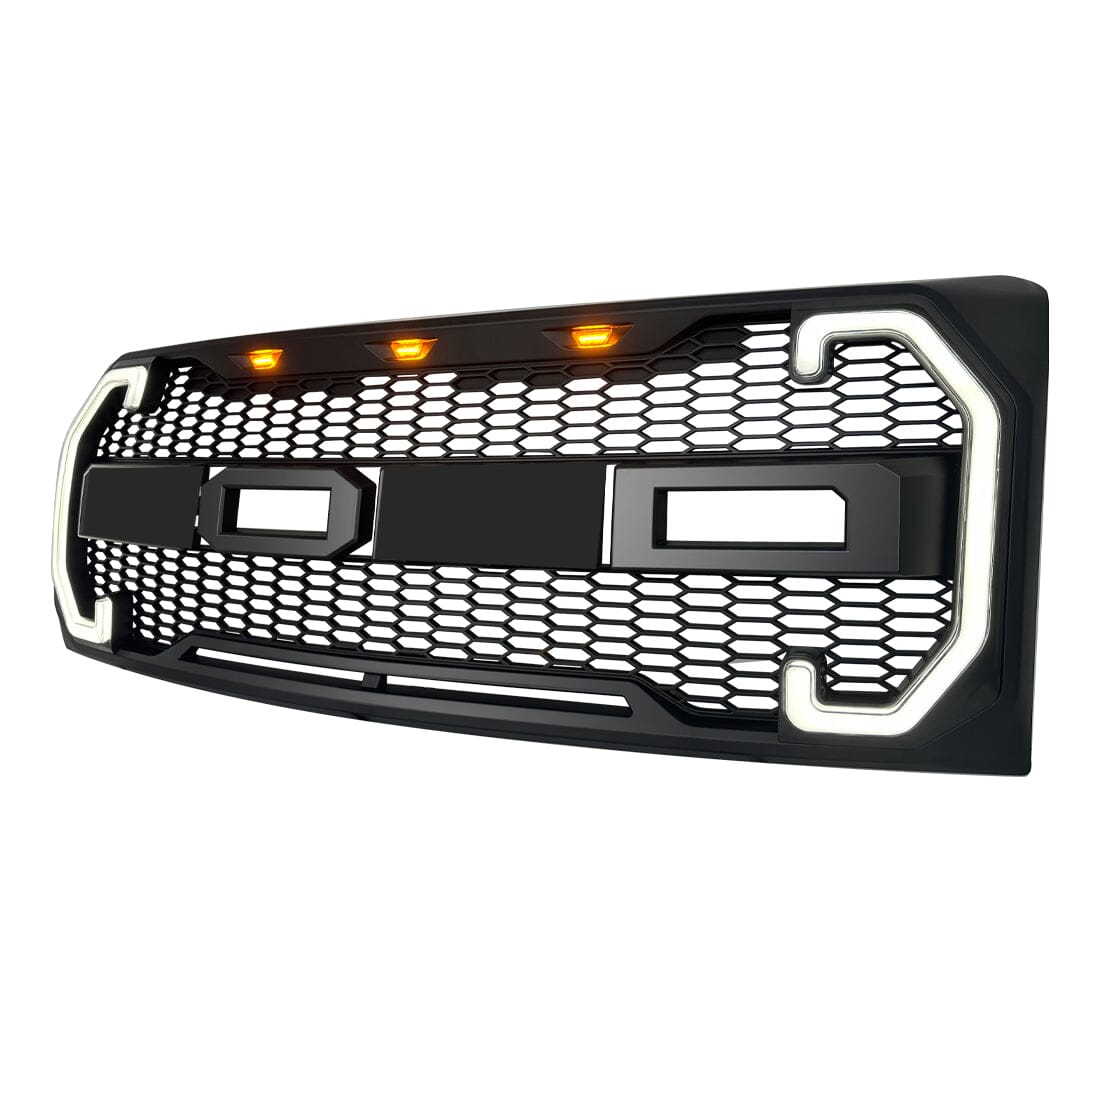 Raptor Style Mesh Grille W/DRL FR & Turn Signal Lights For 2009-2014 Ford F150 | Amoffroad